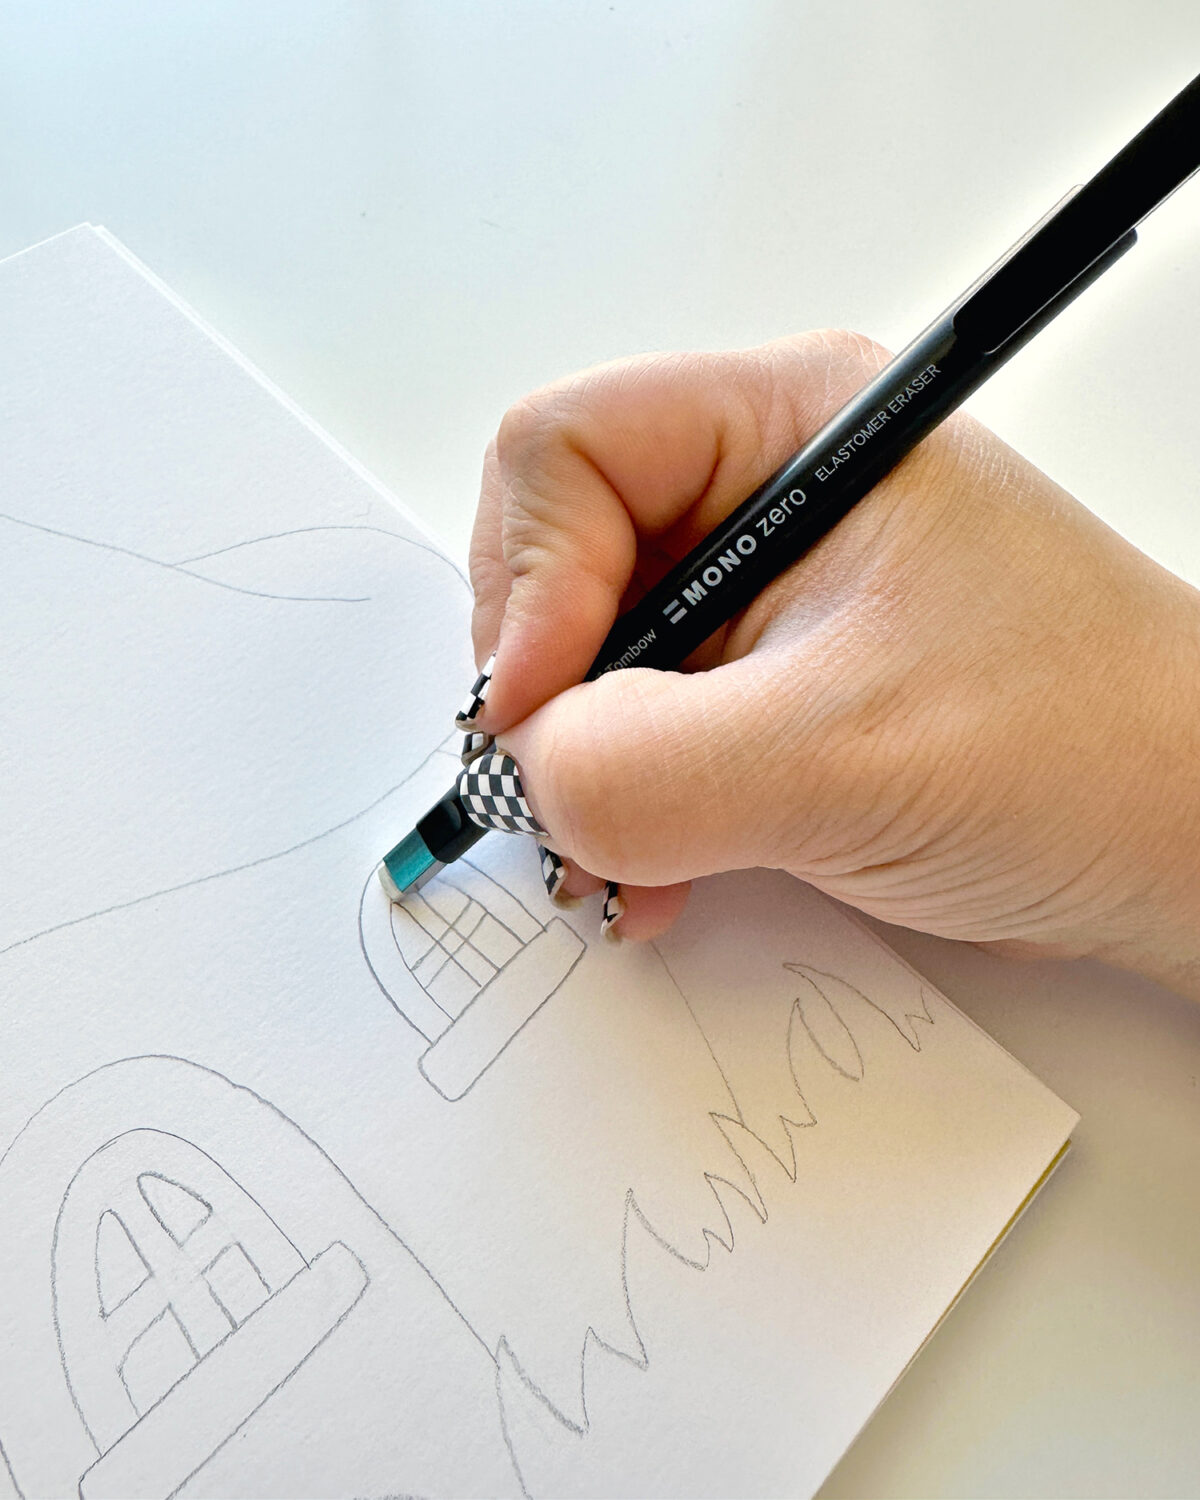 The Tombow MONO Zero Eraser is perfect for erasing minor details! #tombow